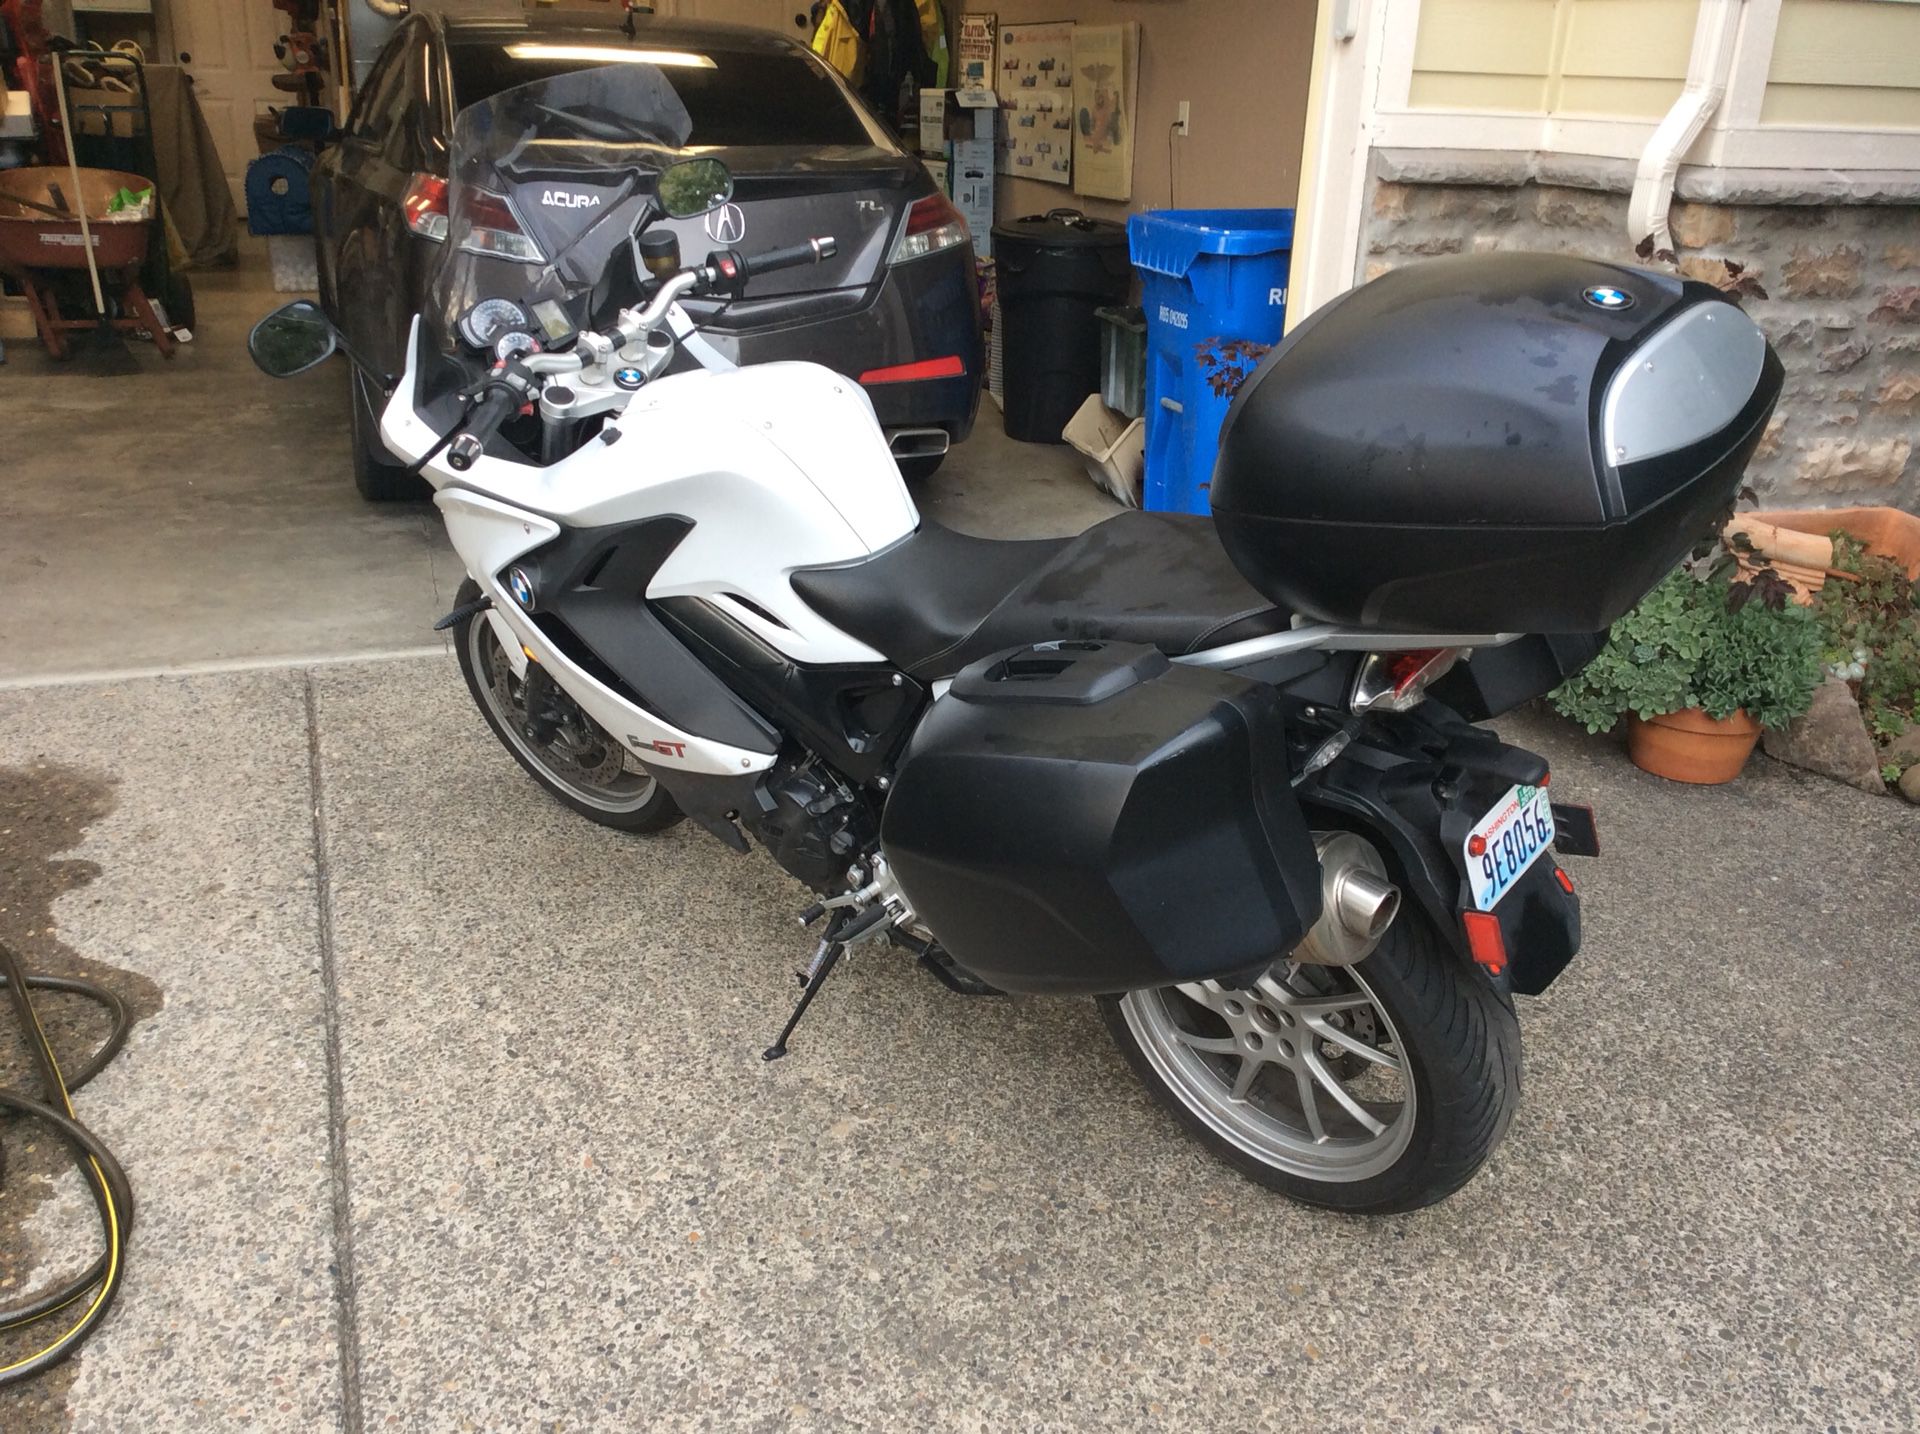 BMW motorcycle gt800 2014. Excellent condition